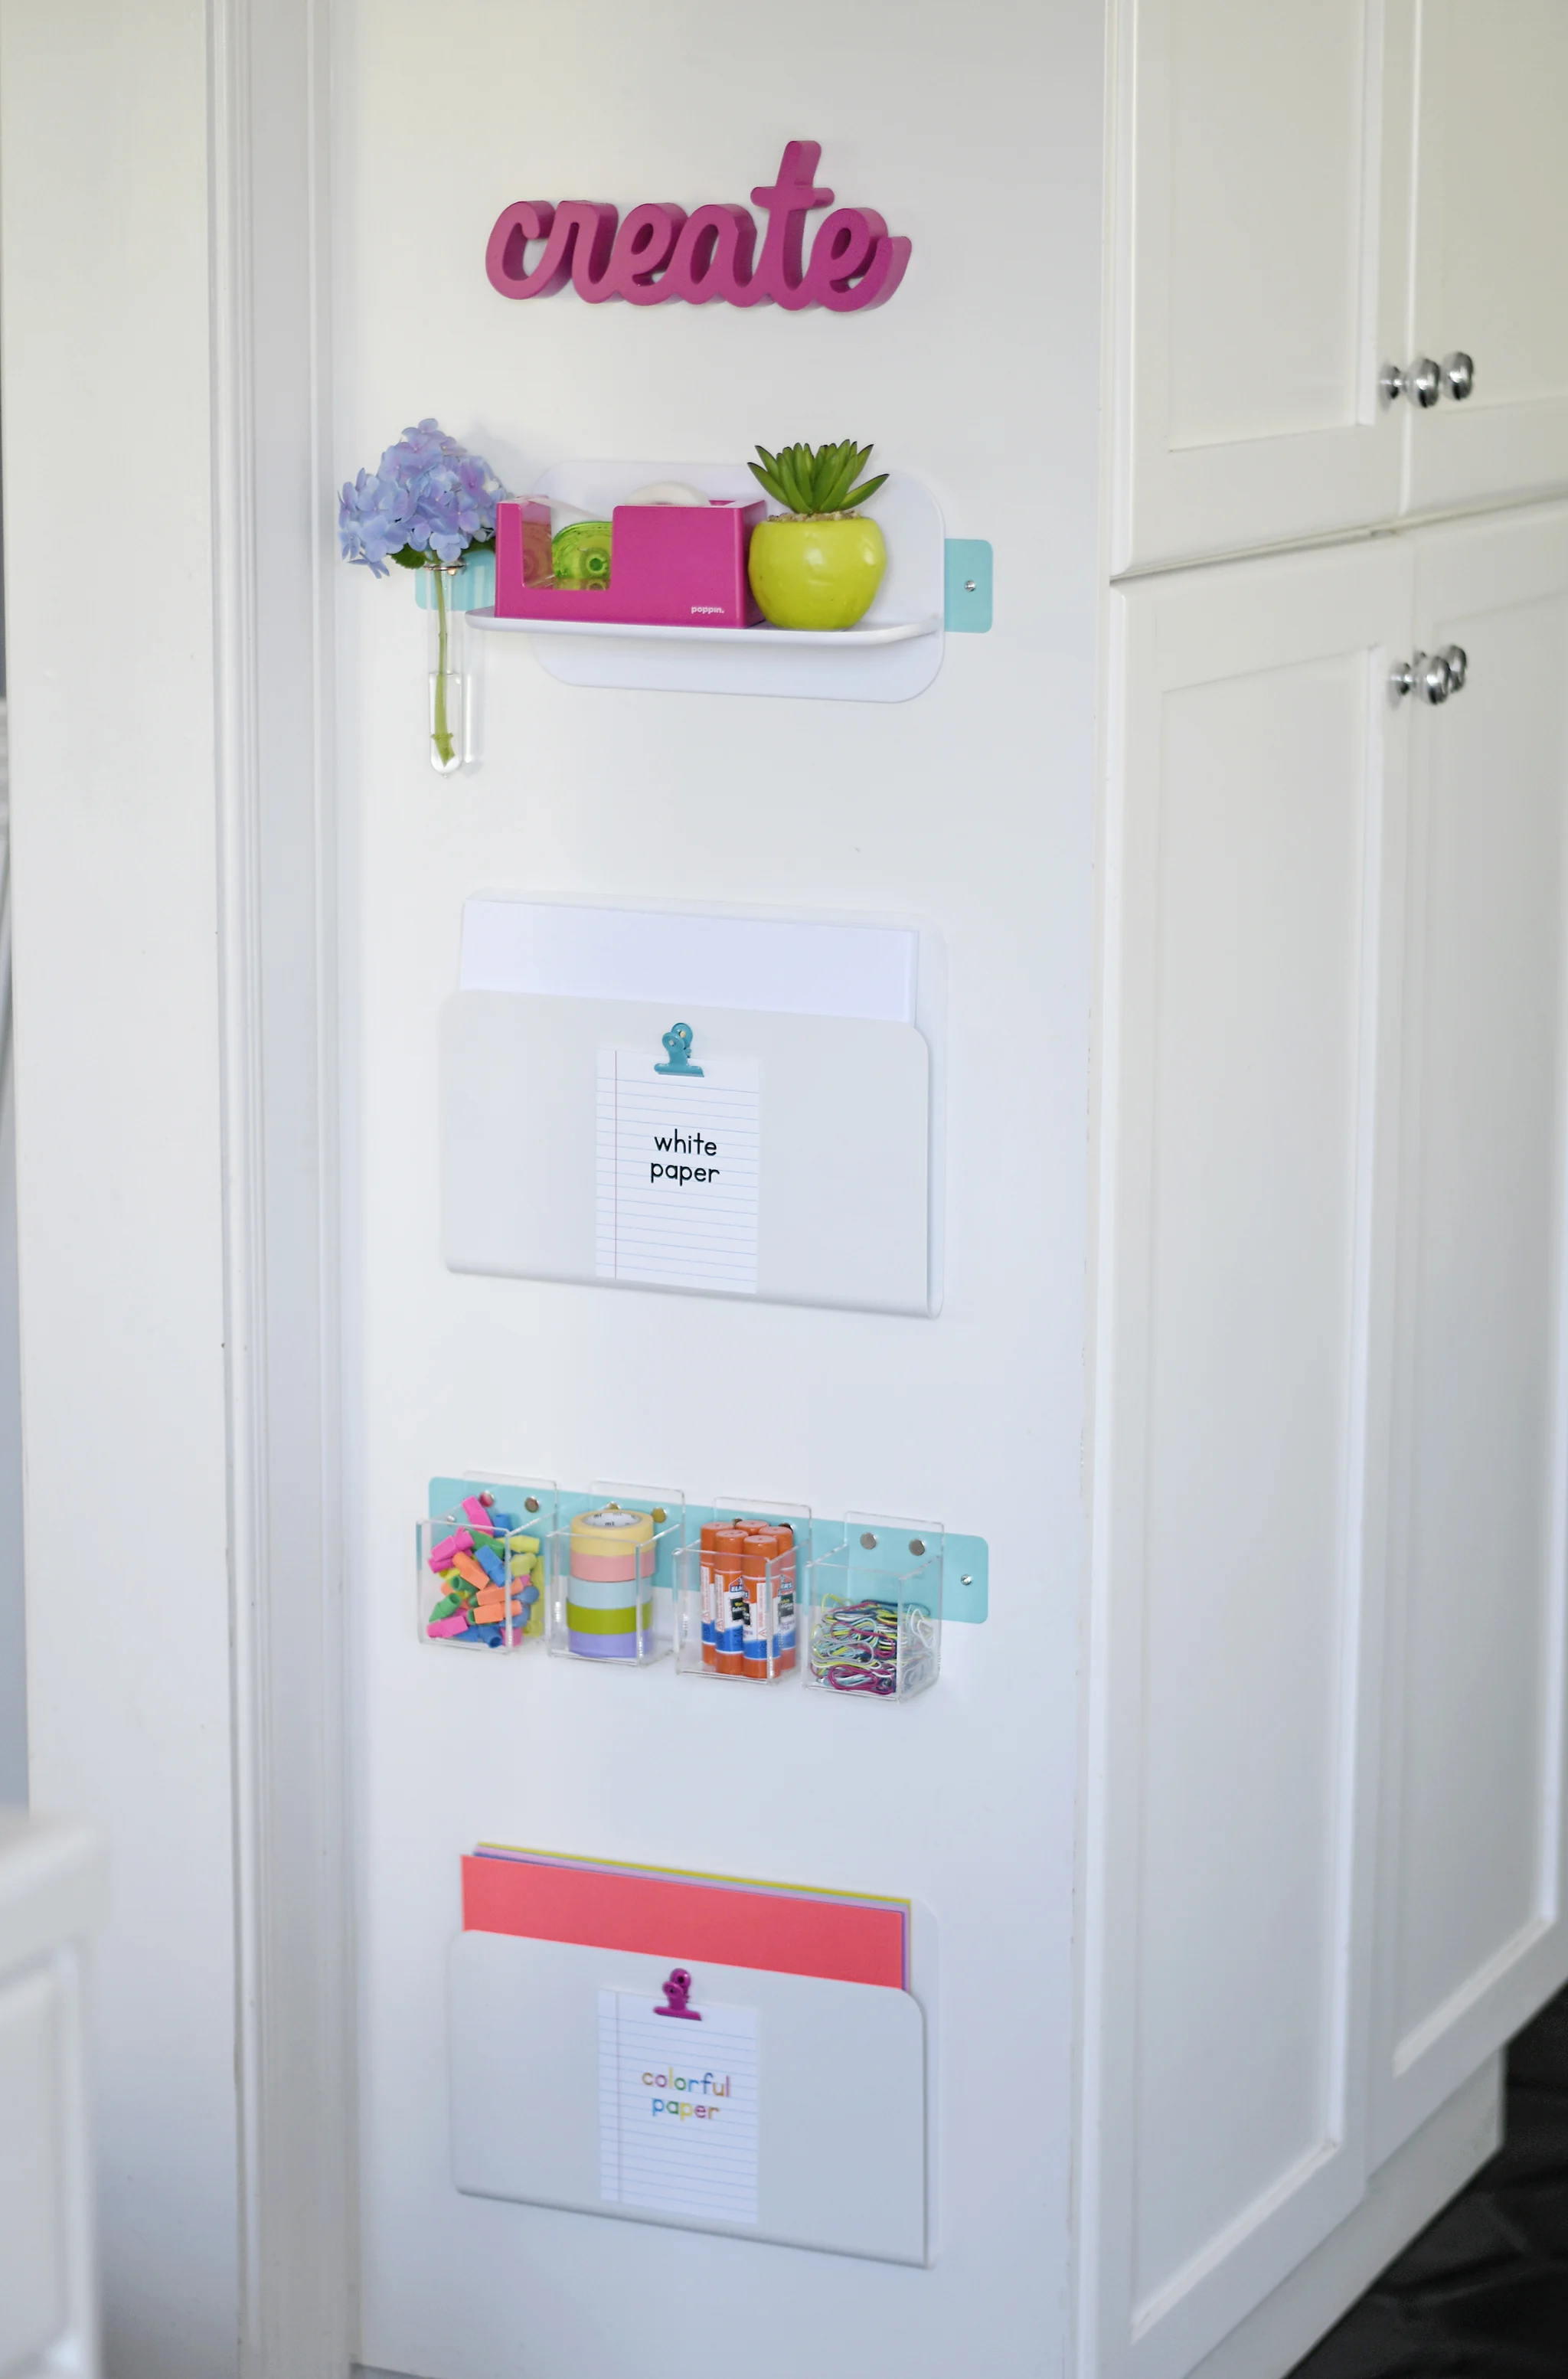 Magnetic strips and wall pockets hold papers and small items!a